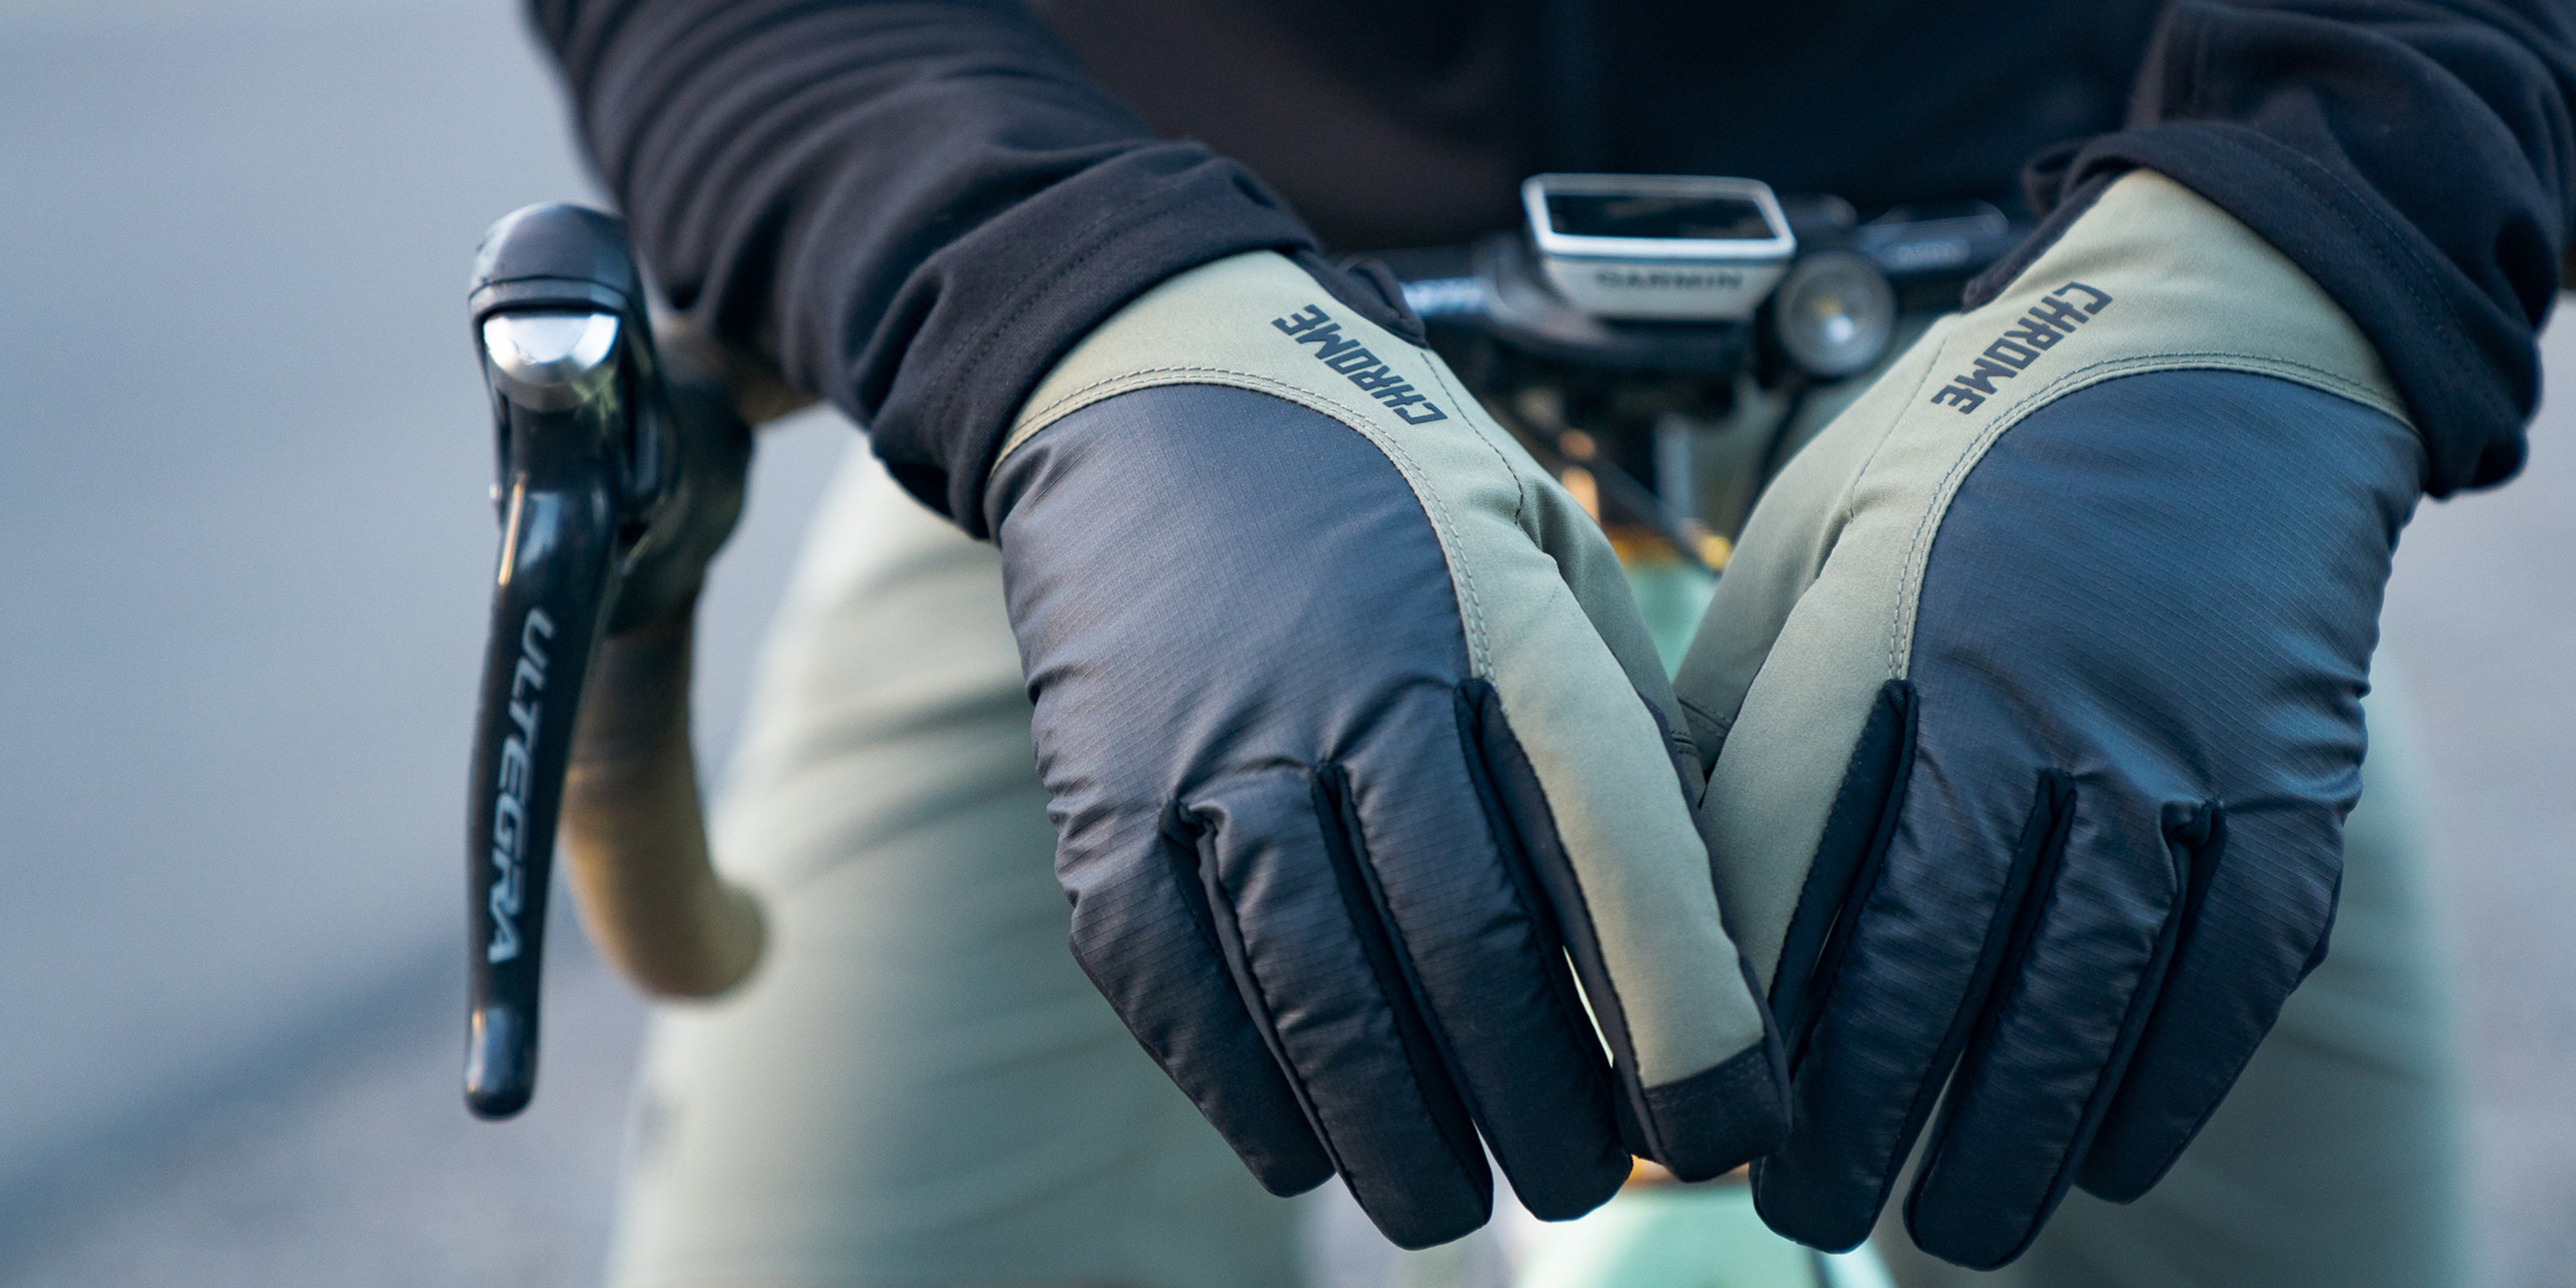 Midweight Cycling Gloves worn by a bike rider desktop image size